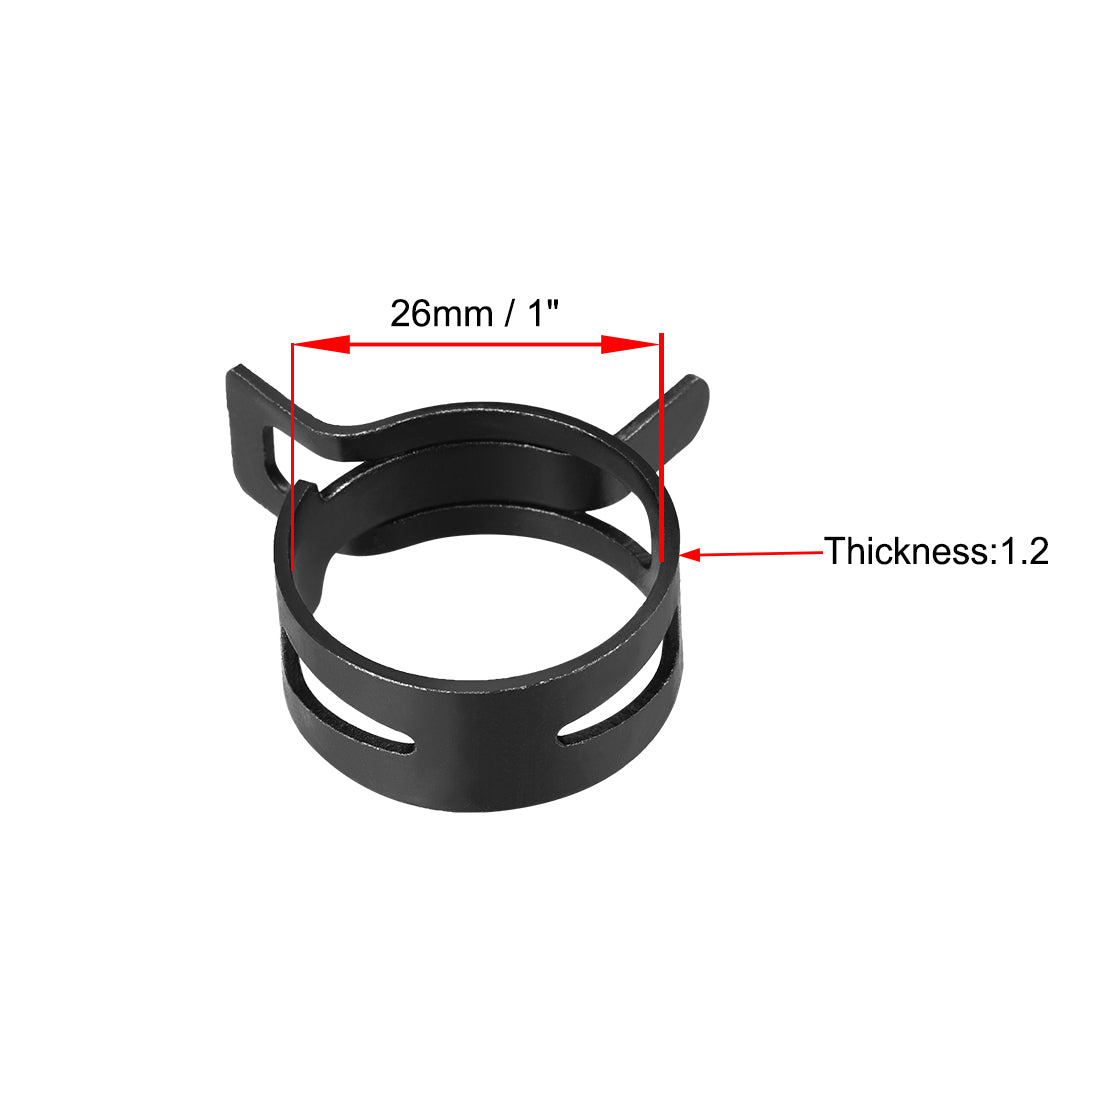 Uxcell Uxcell Steel Band Clamp 24mm for Fuel Line Silicone Hose Tube Spring Clips Clamp Black Manganese Steel 5Pcs